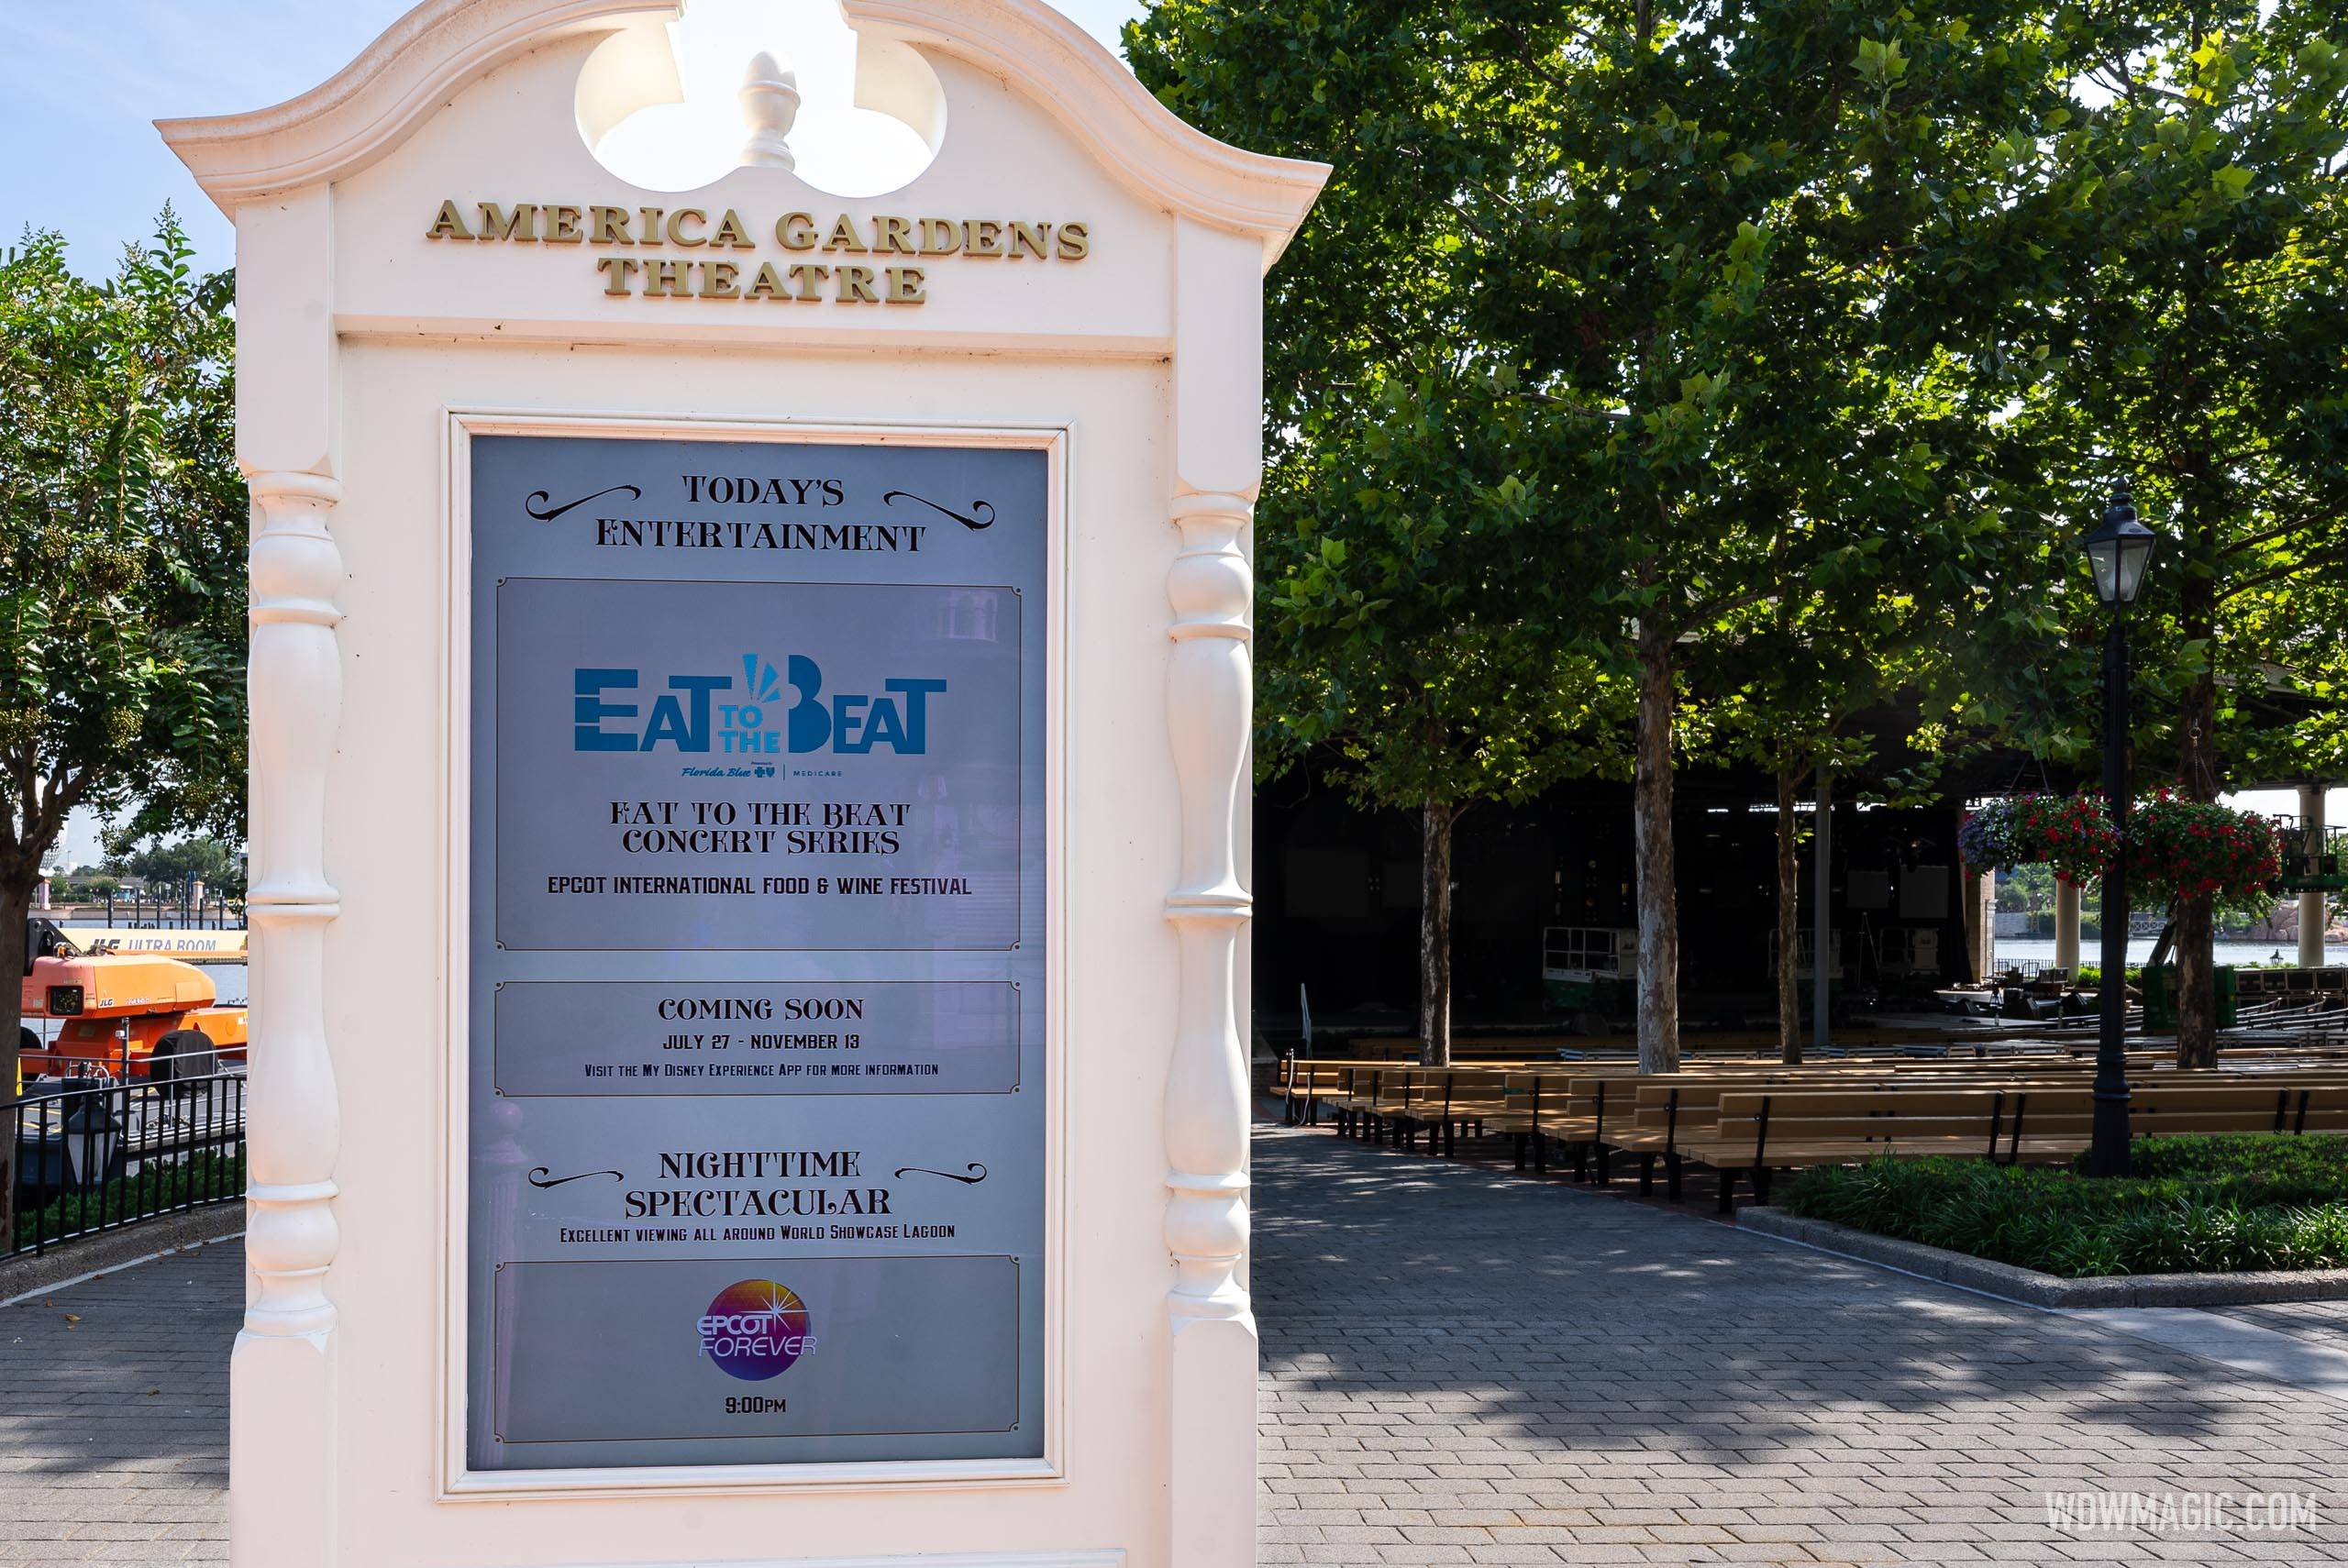 Digital signage at The America Gardens Theatre